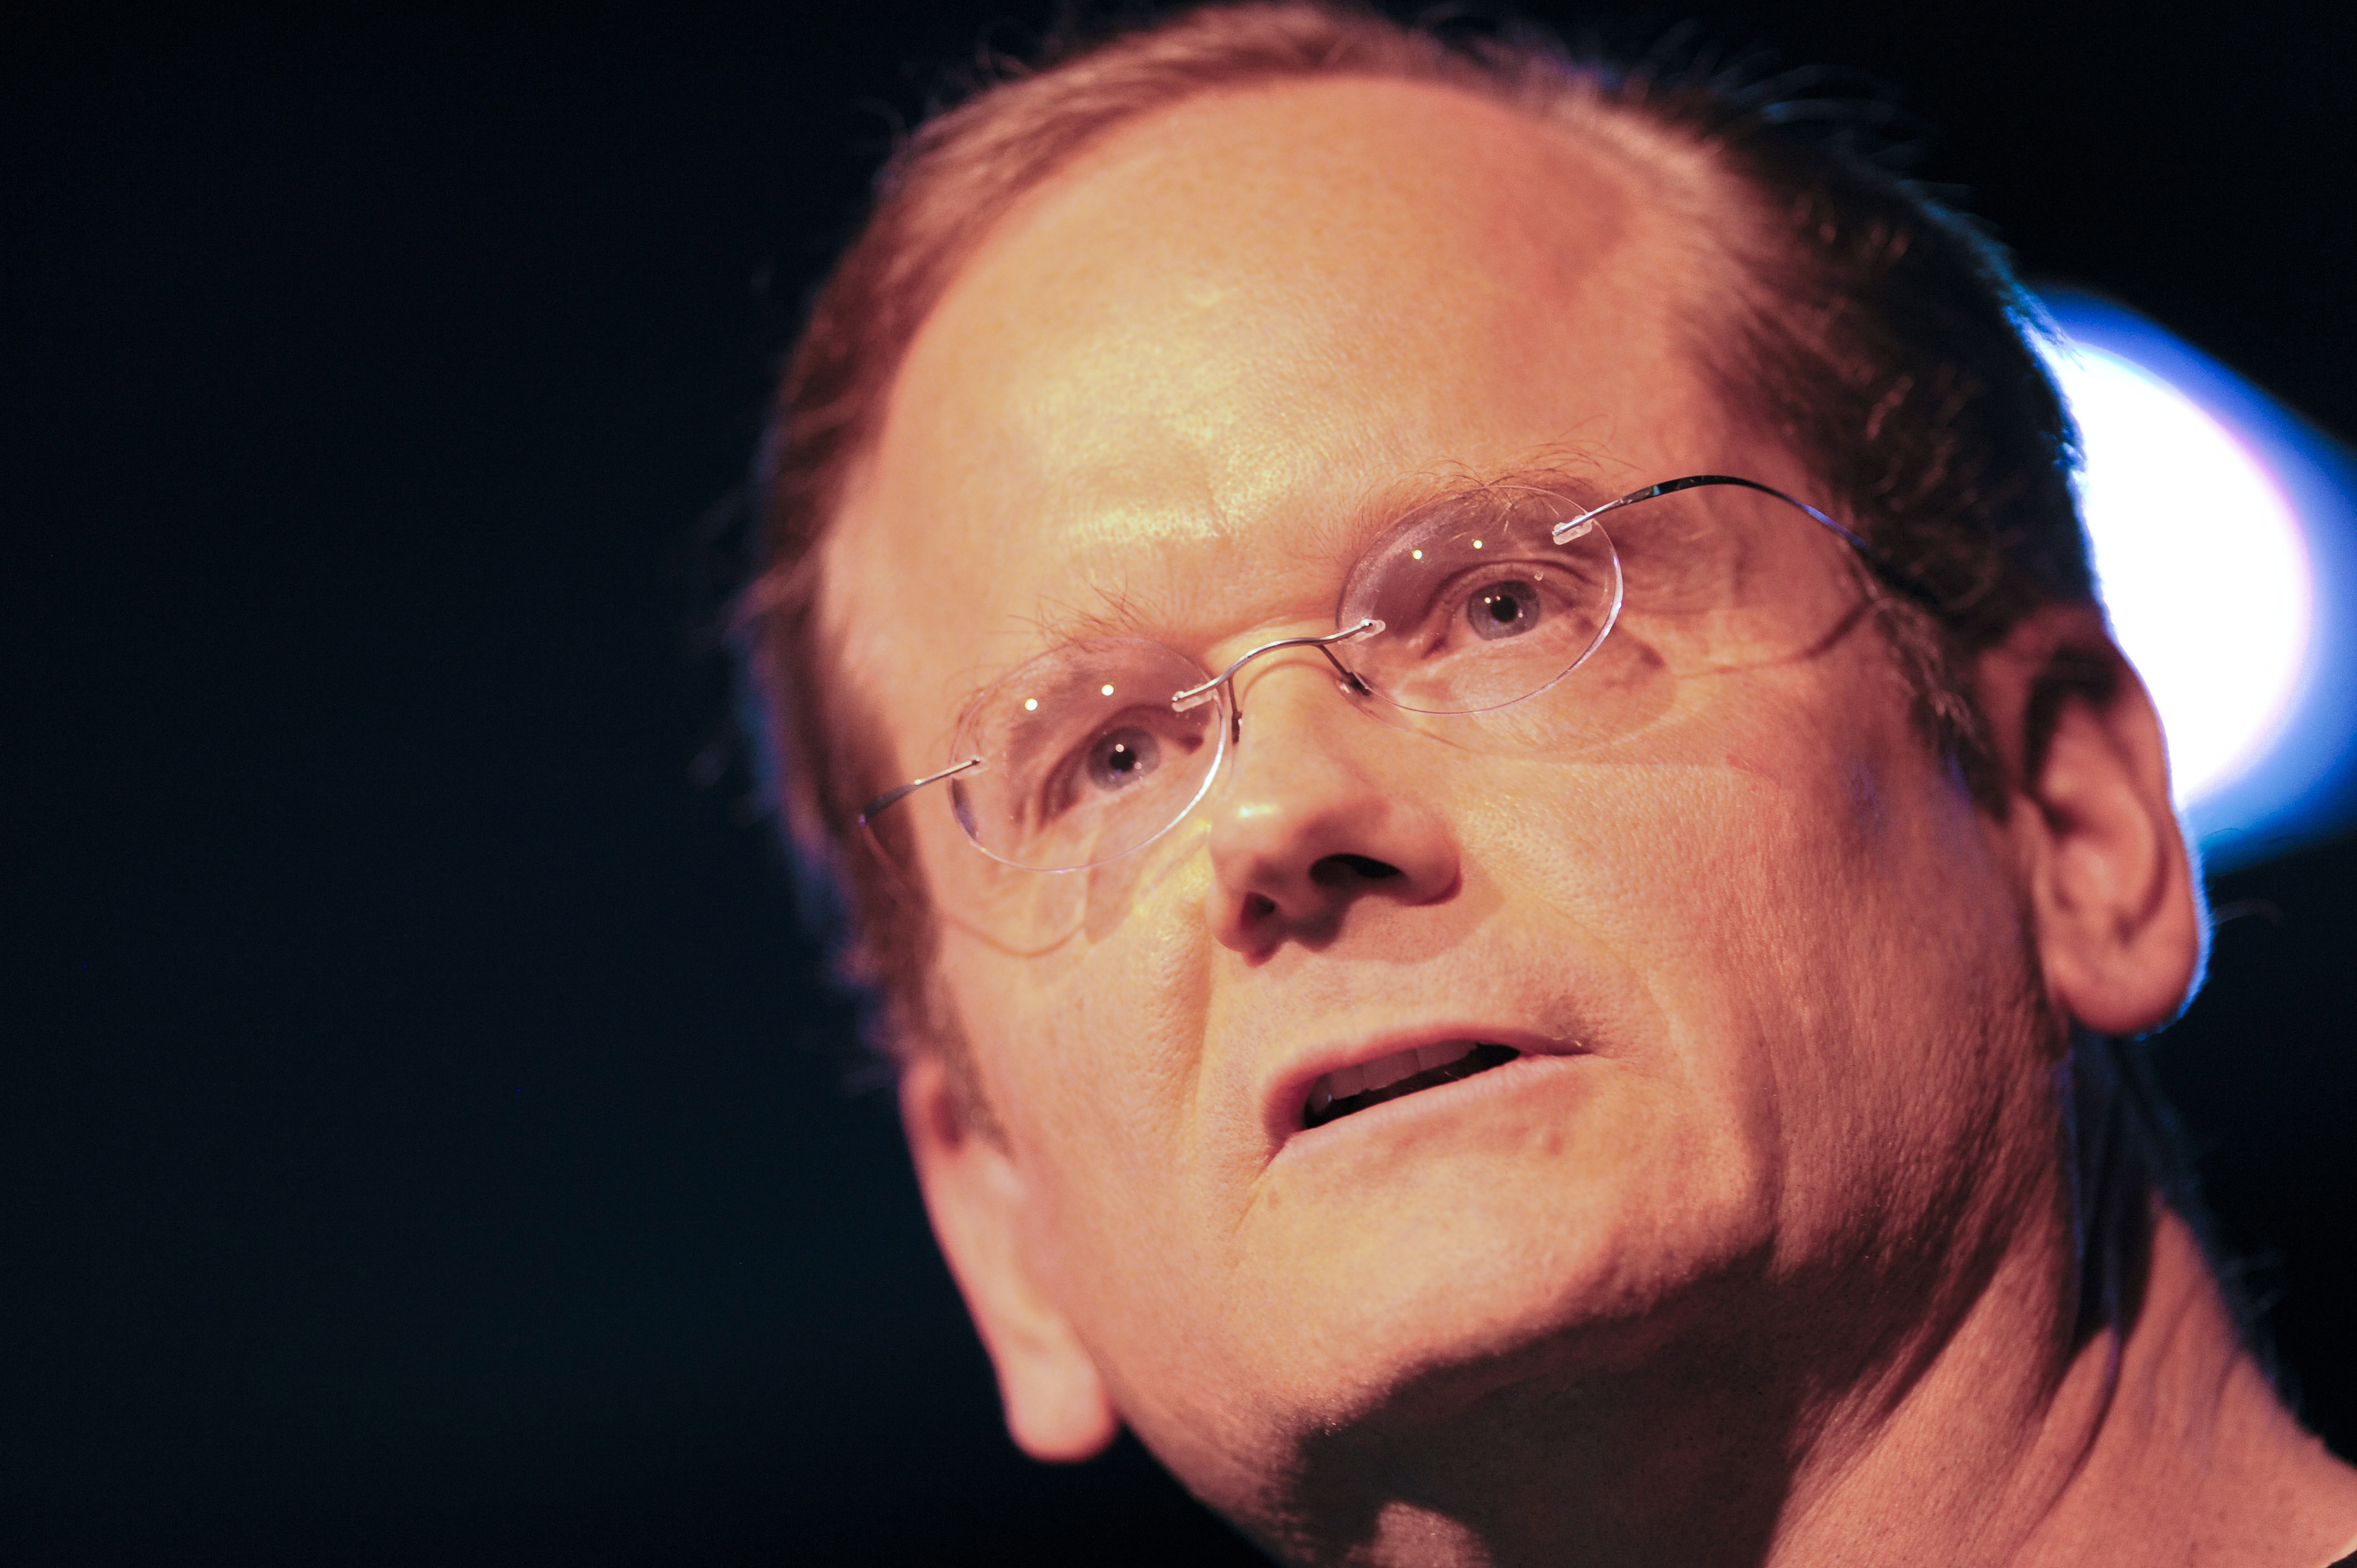 Lawrence Lessig speaks during the Aspen Ideas Festival 2011 on June 27, 2011 in Aspen, Colorado. (Riccardo S. Savi—Getty Images)